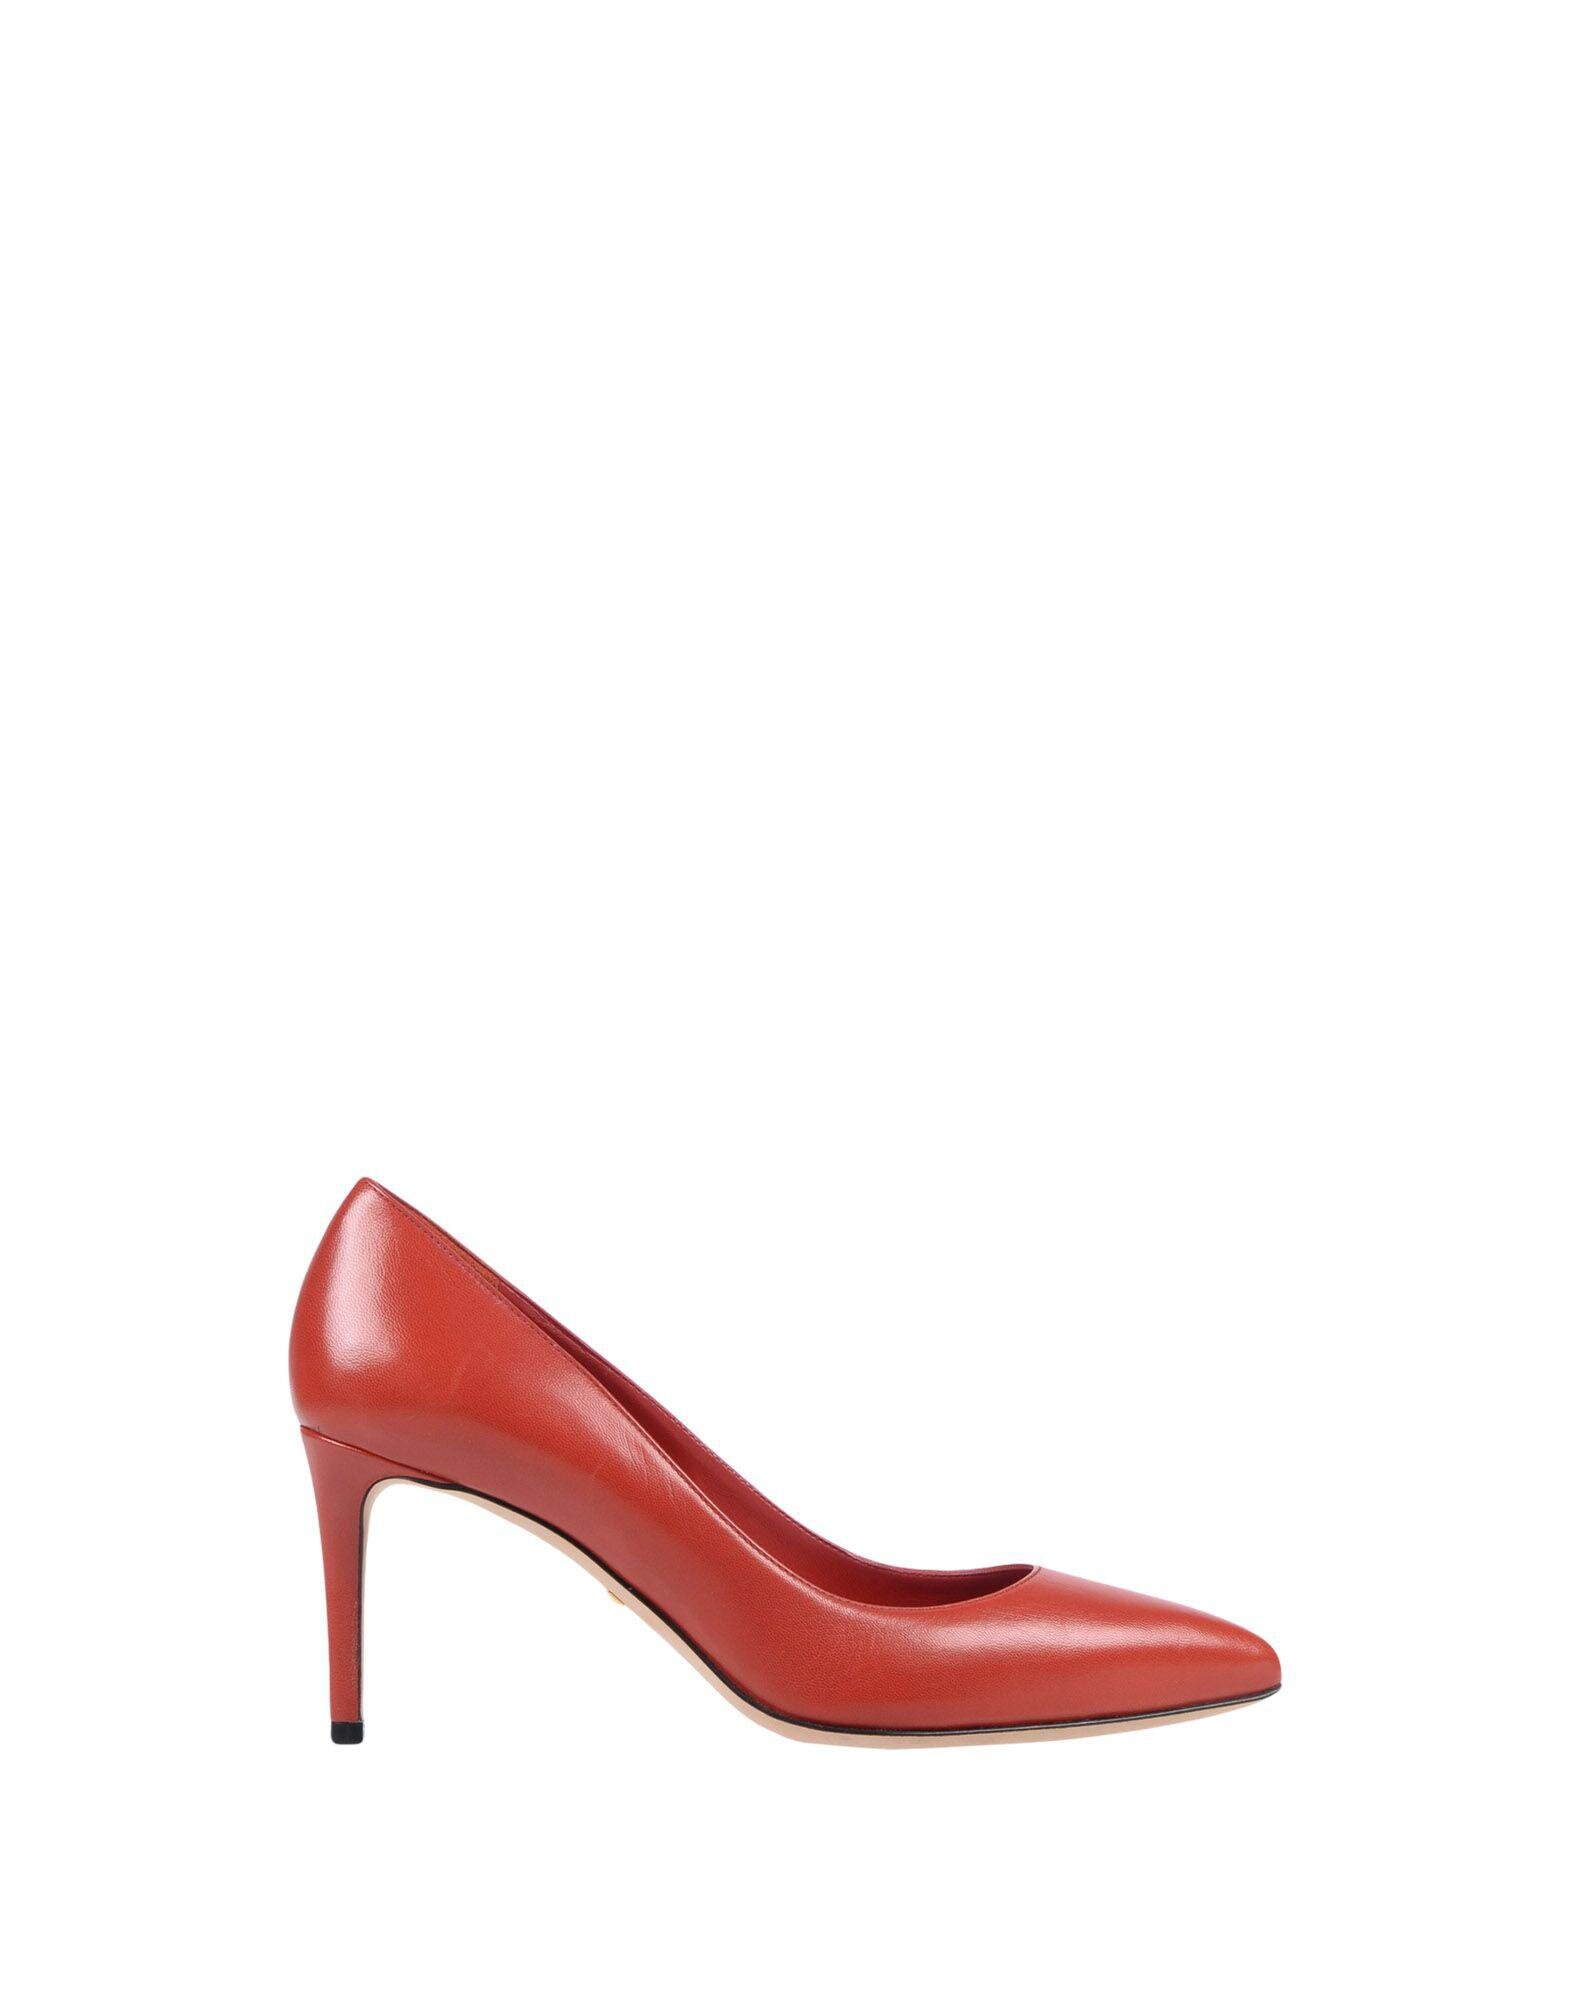 Gucci Leather Pumps in Red.jpg